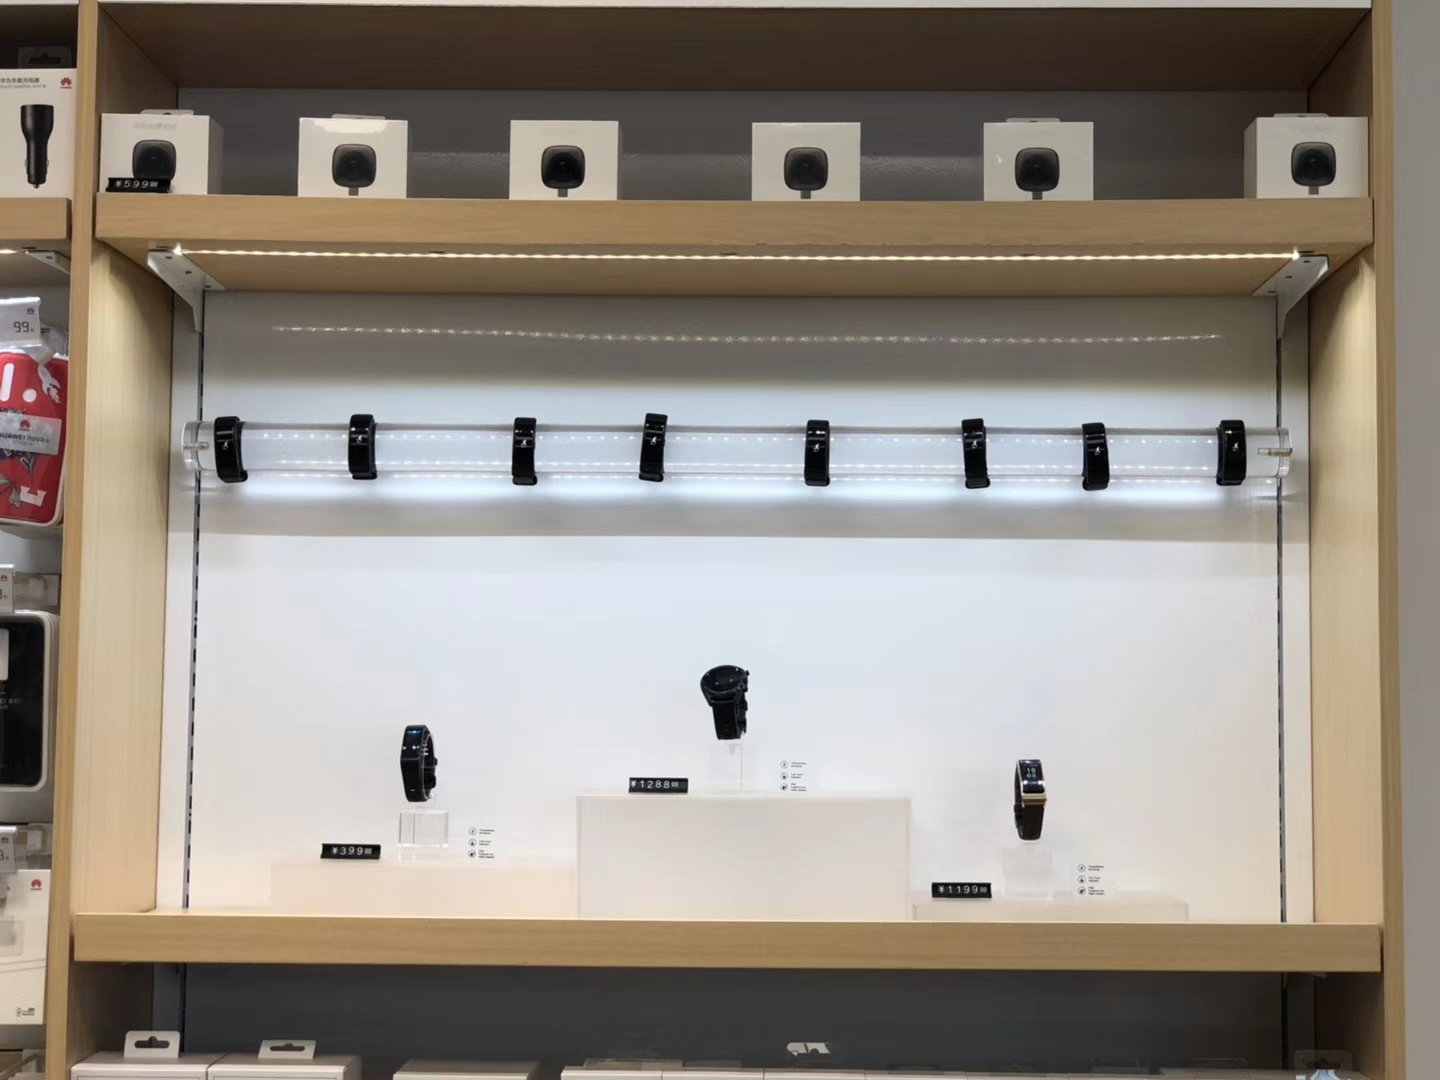 rechi retail display and store fixture for electronic store